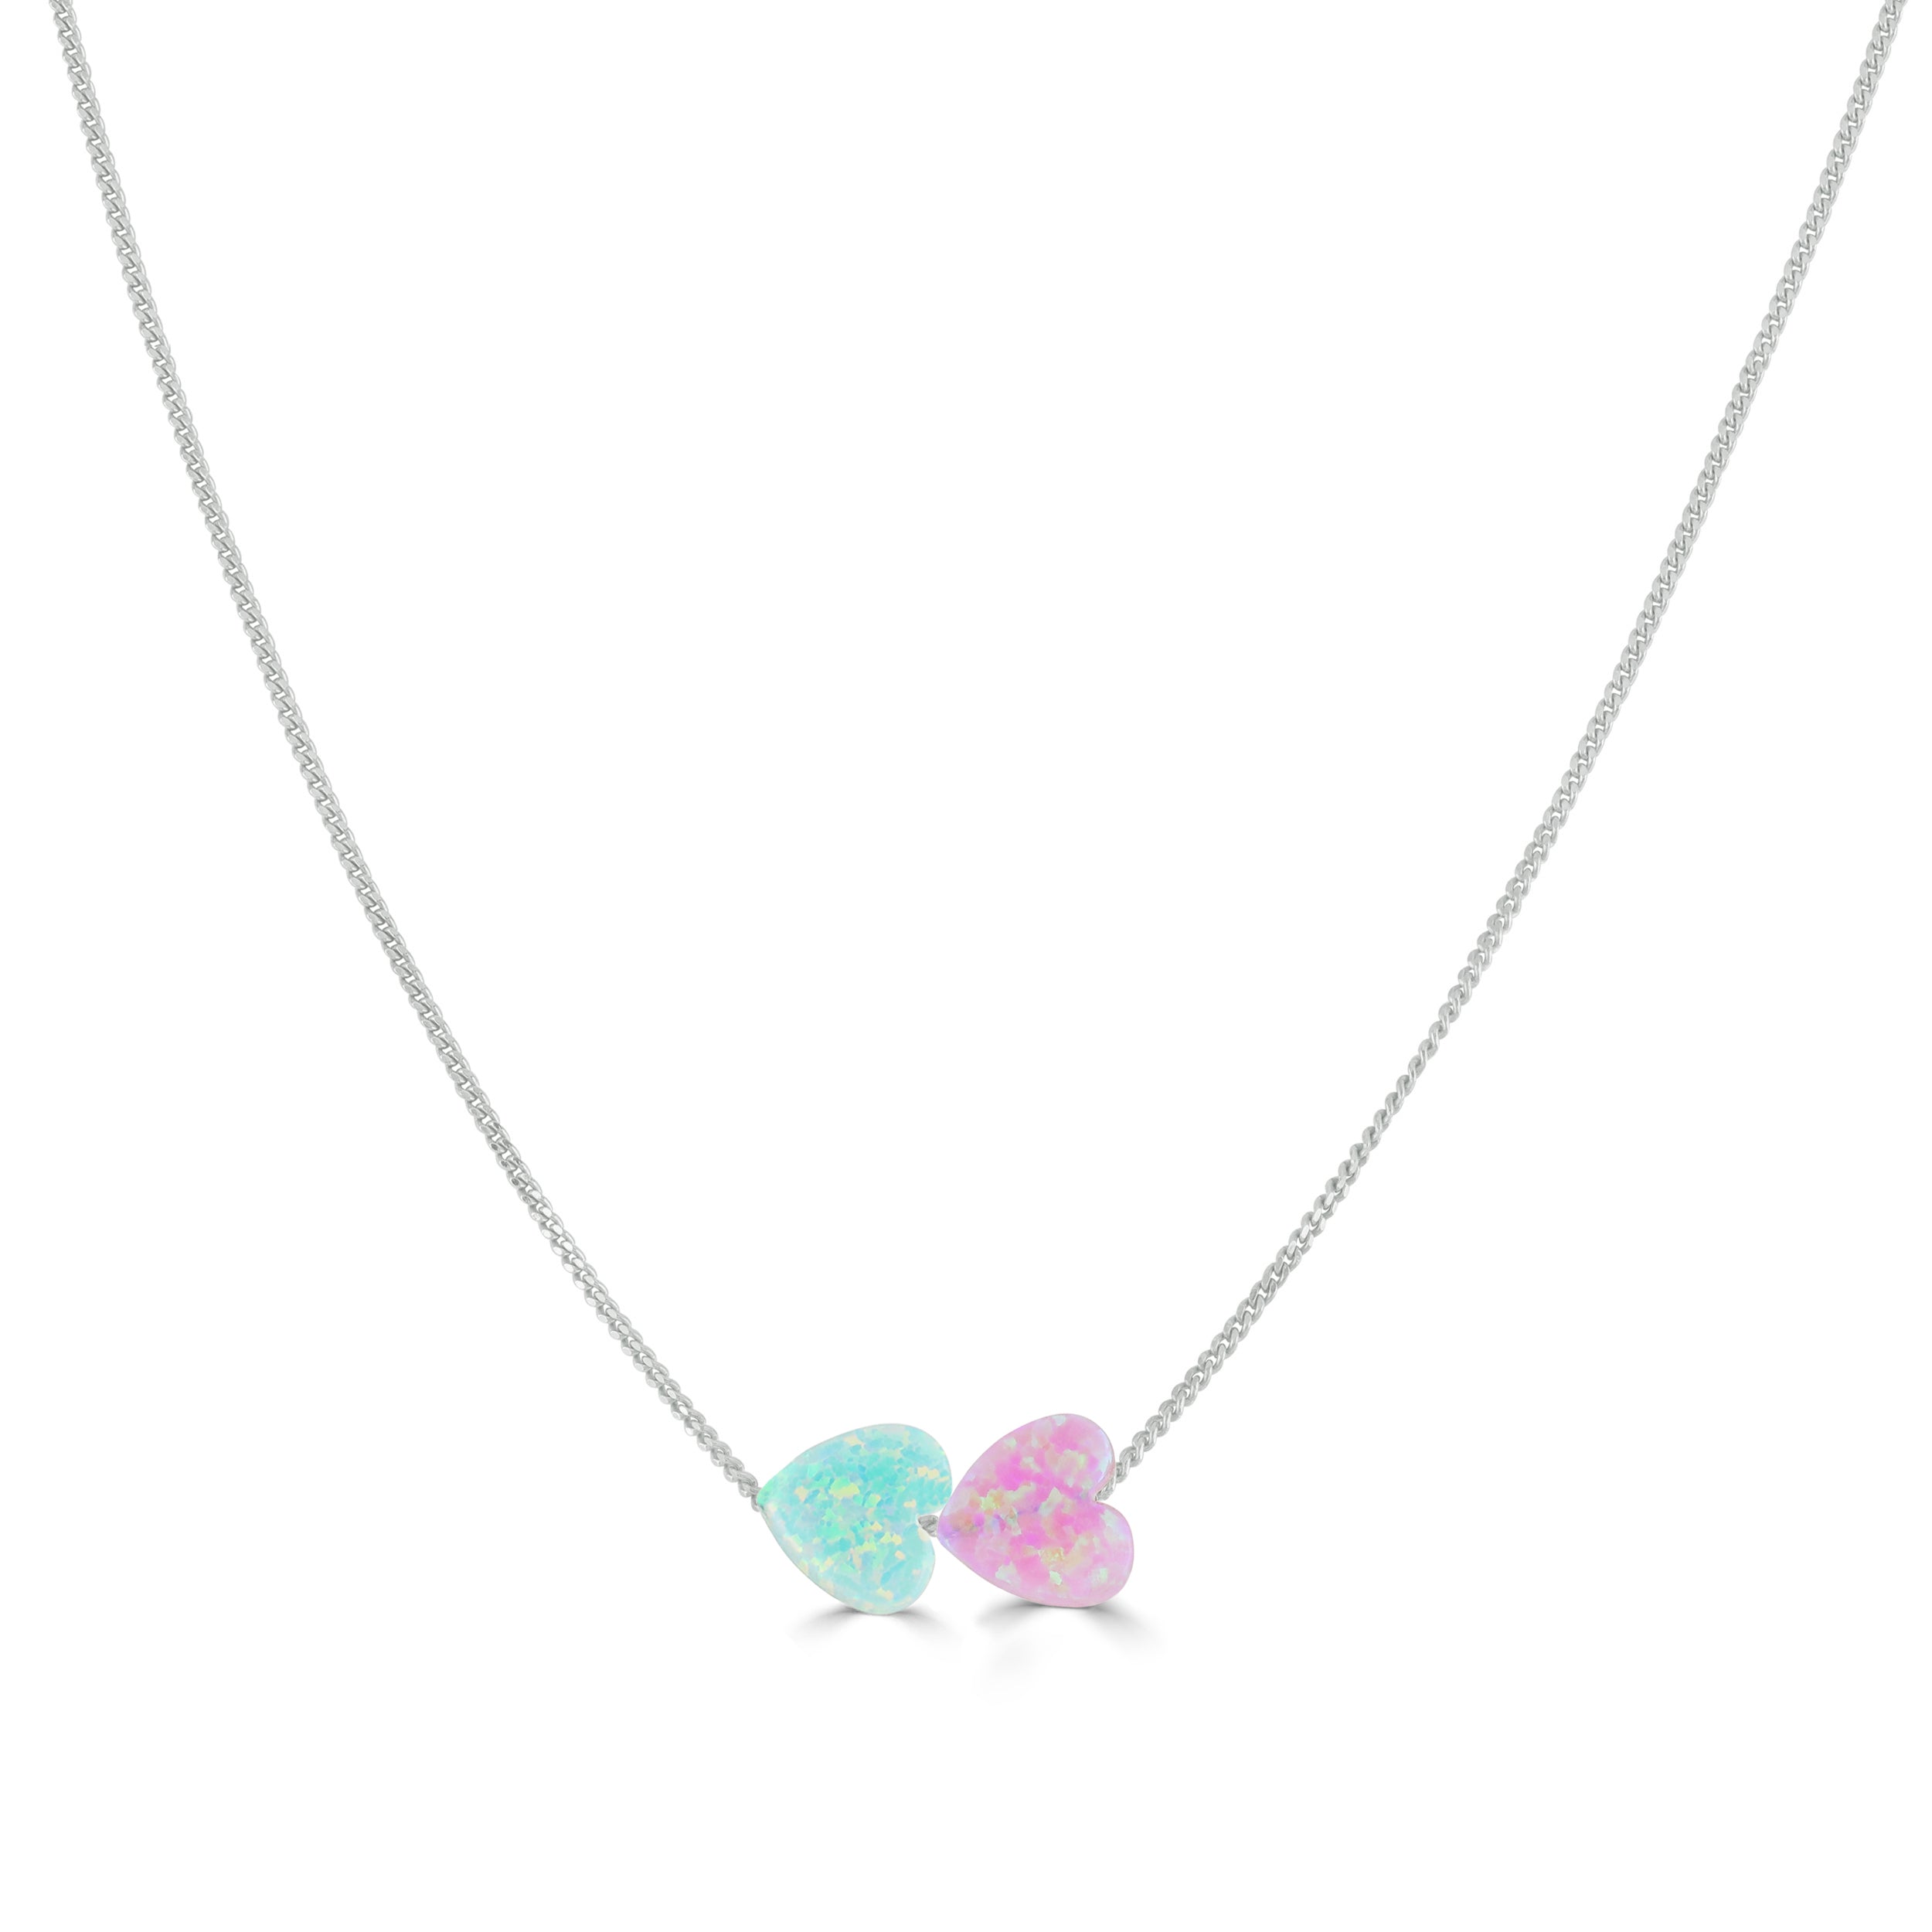 Aqua and Pink Opal Heart Necklace Silver